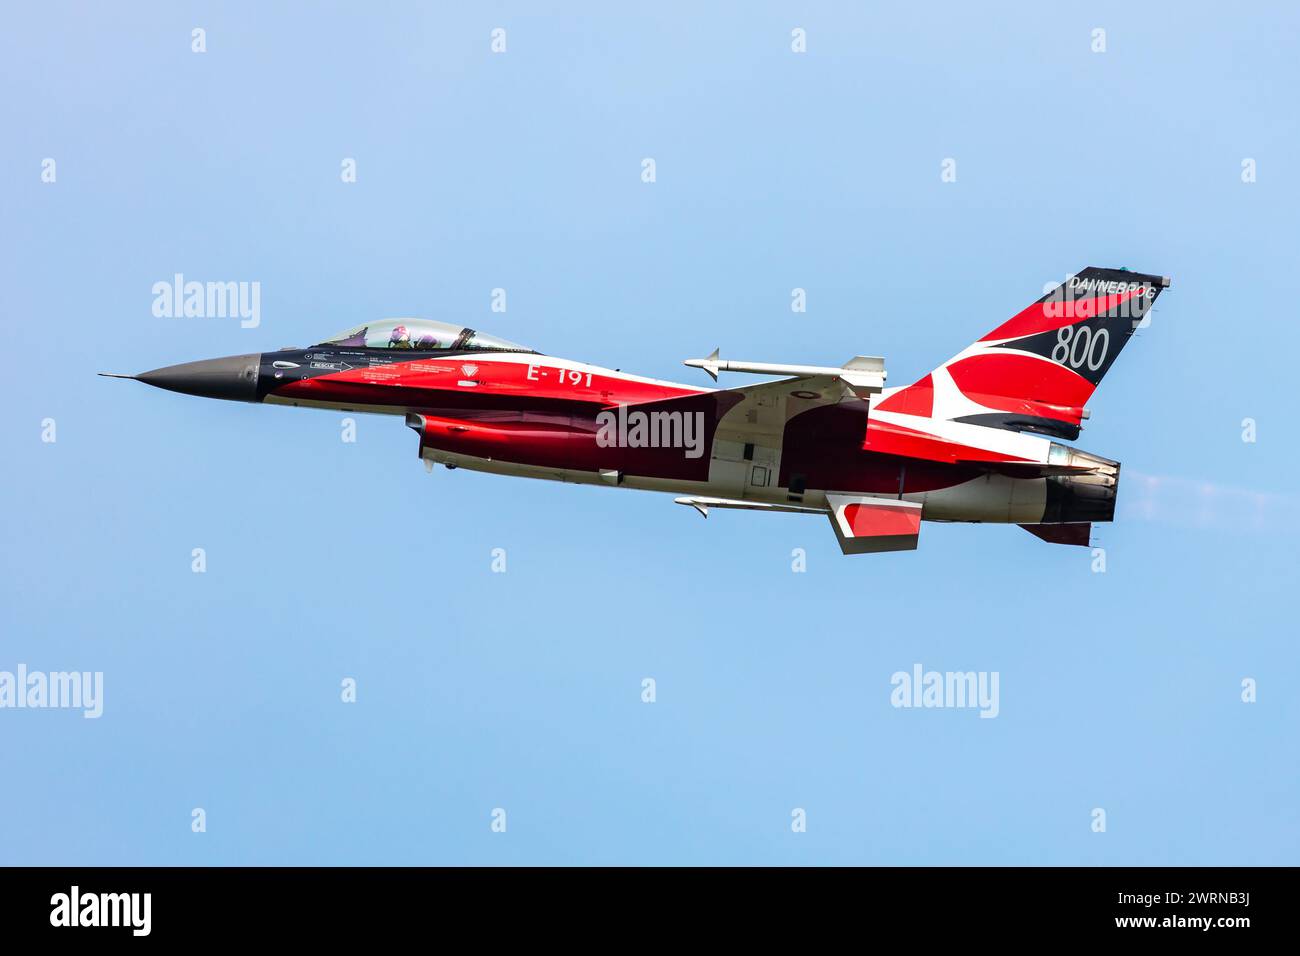 Radom, Poland - August 26, 2023: Royal Danish Air Force Lockheed F-16 Fighting Falcon fighter jet plane flying. Aviation and military aircraft. Stock Photo